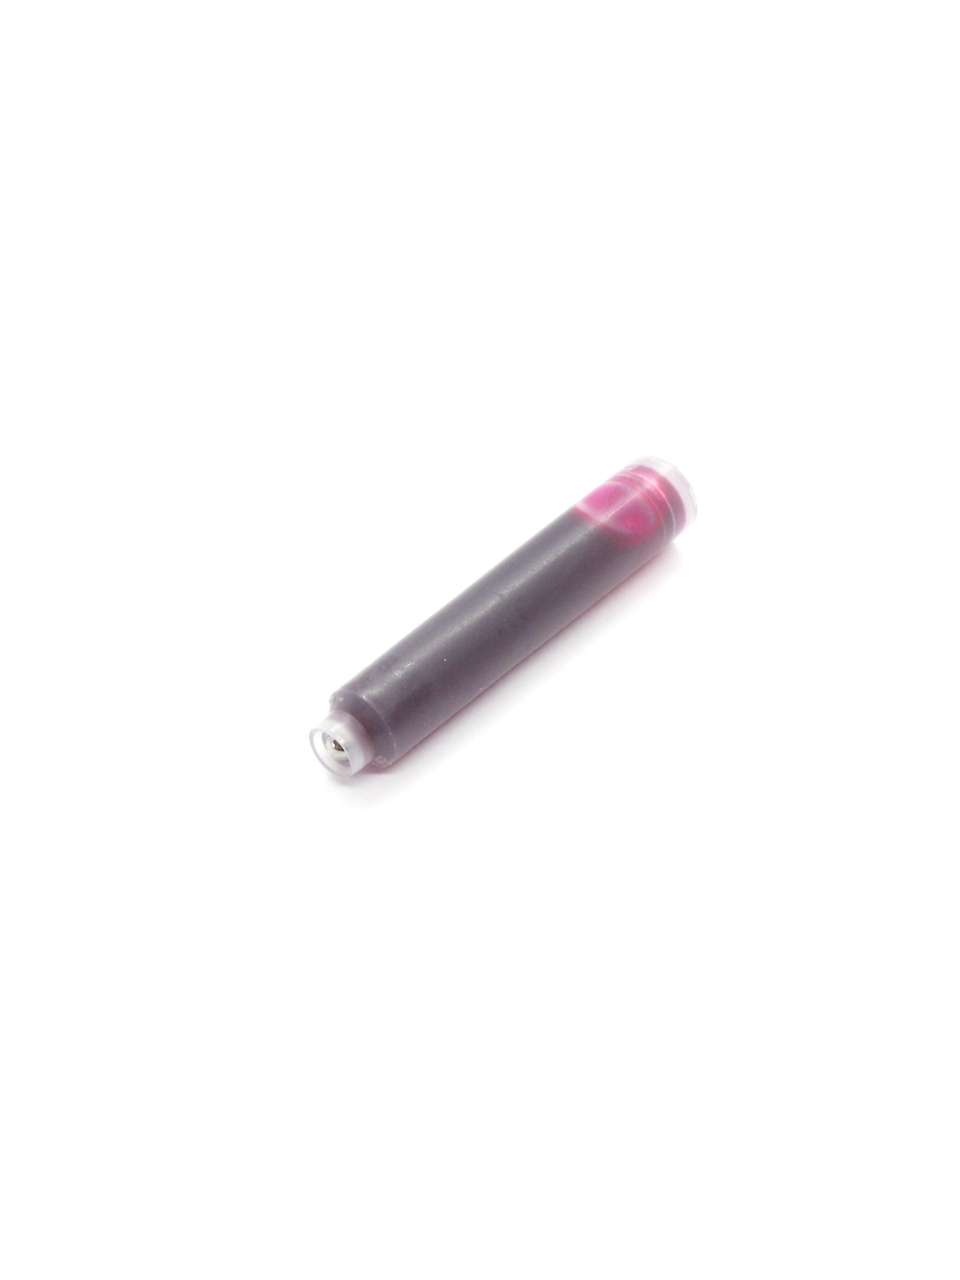 Cartridges For Fend Fountain Pens (Pink)